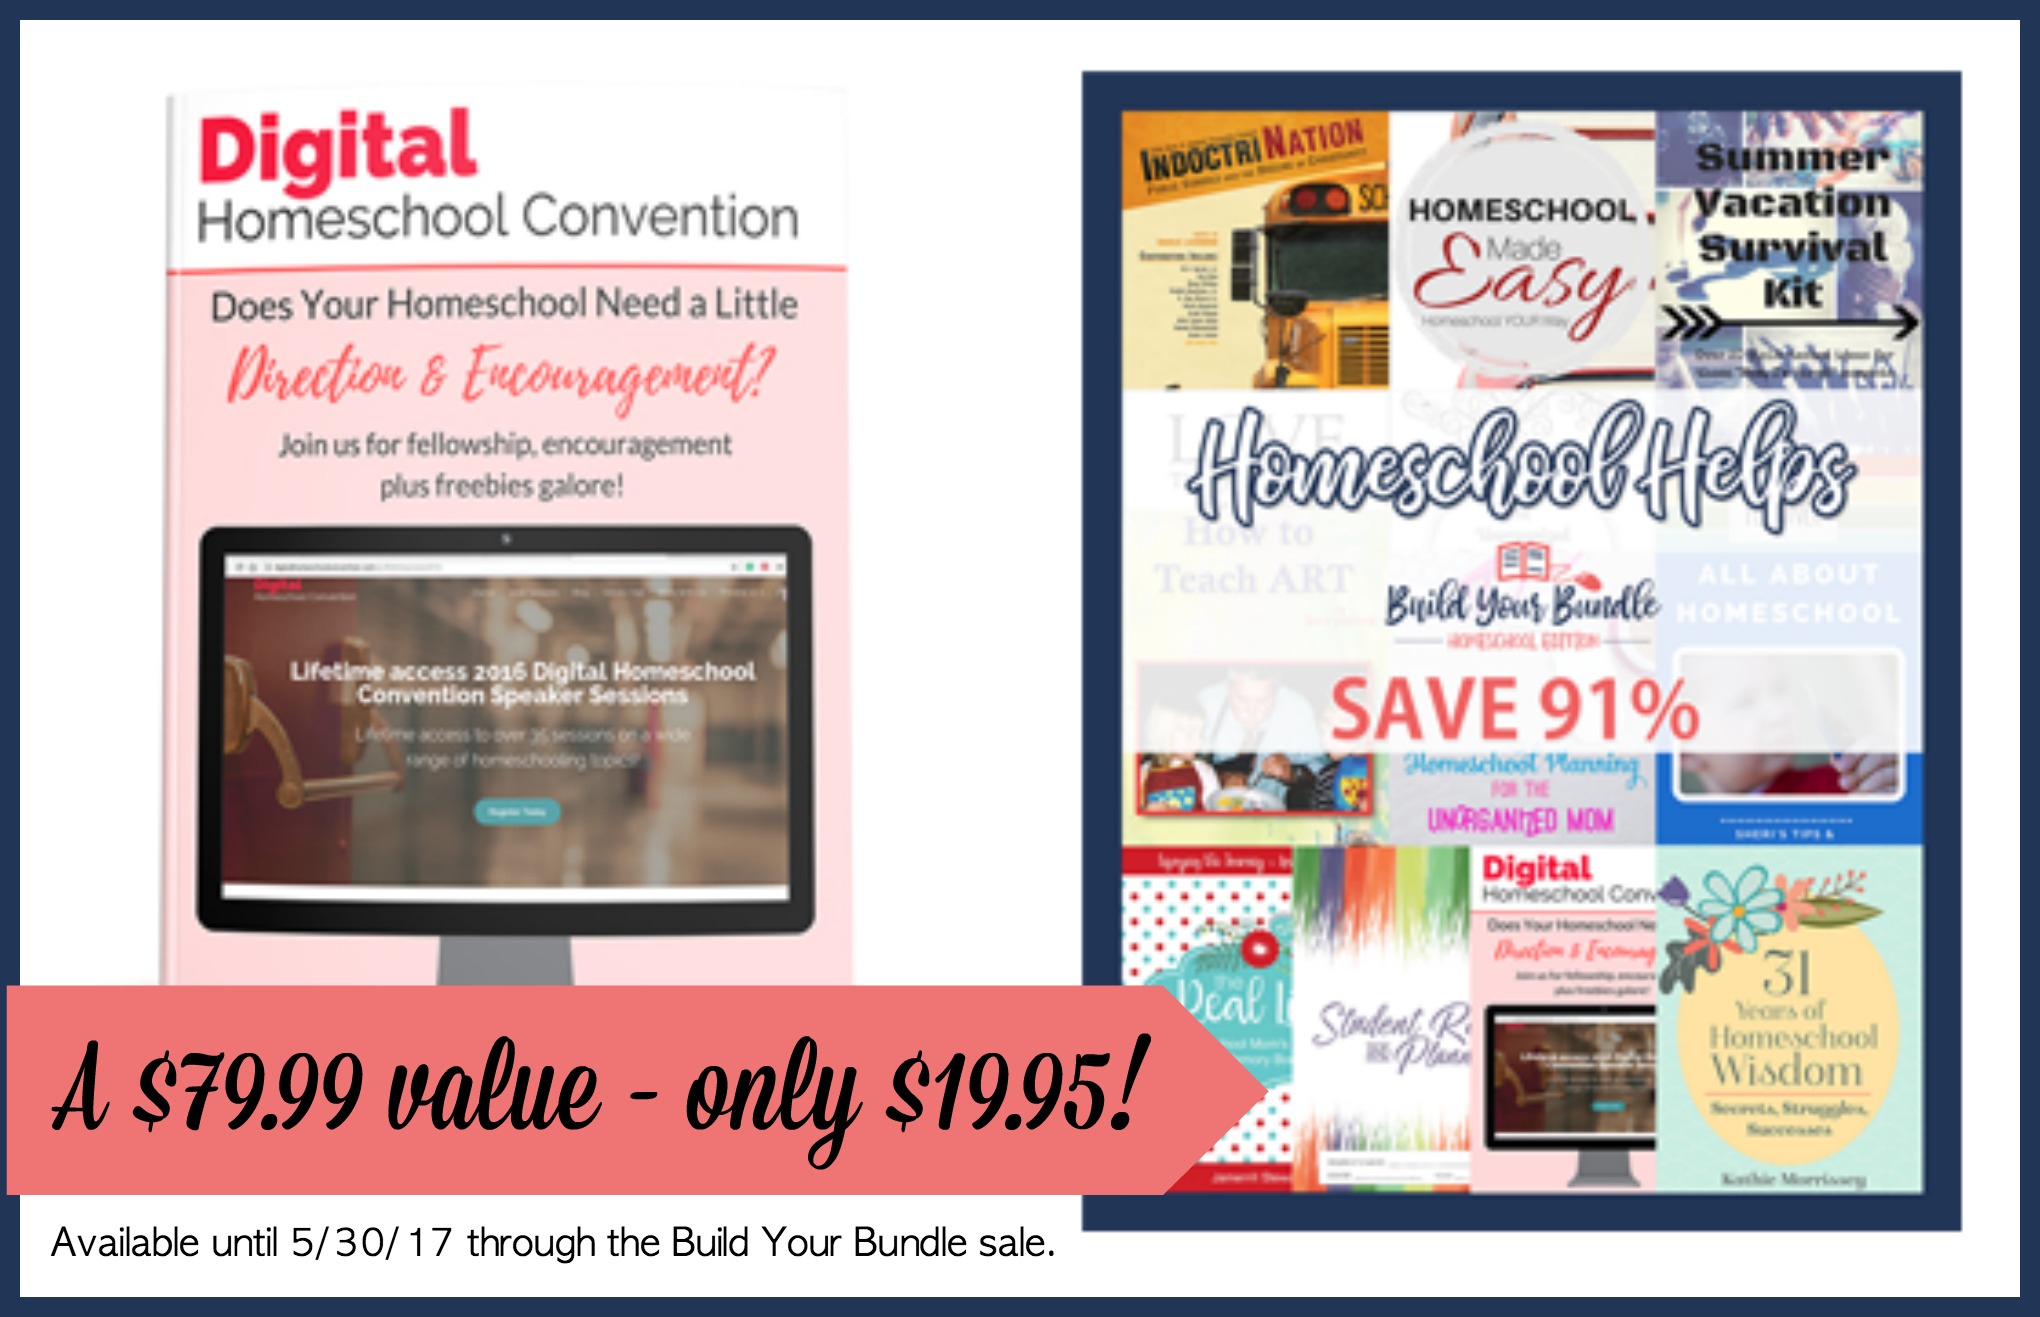 What if You Can't Attend a Homeschool Convention?